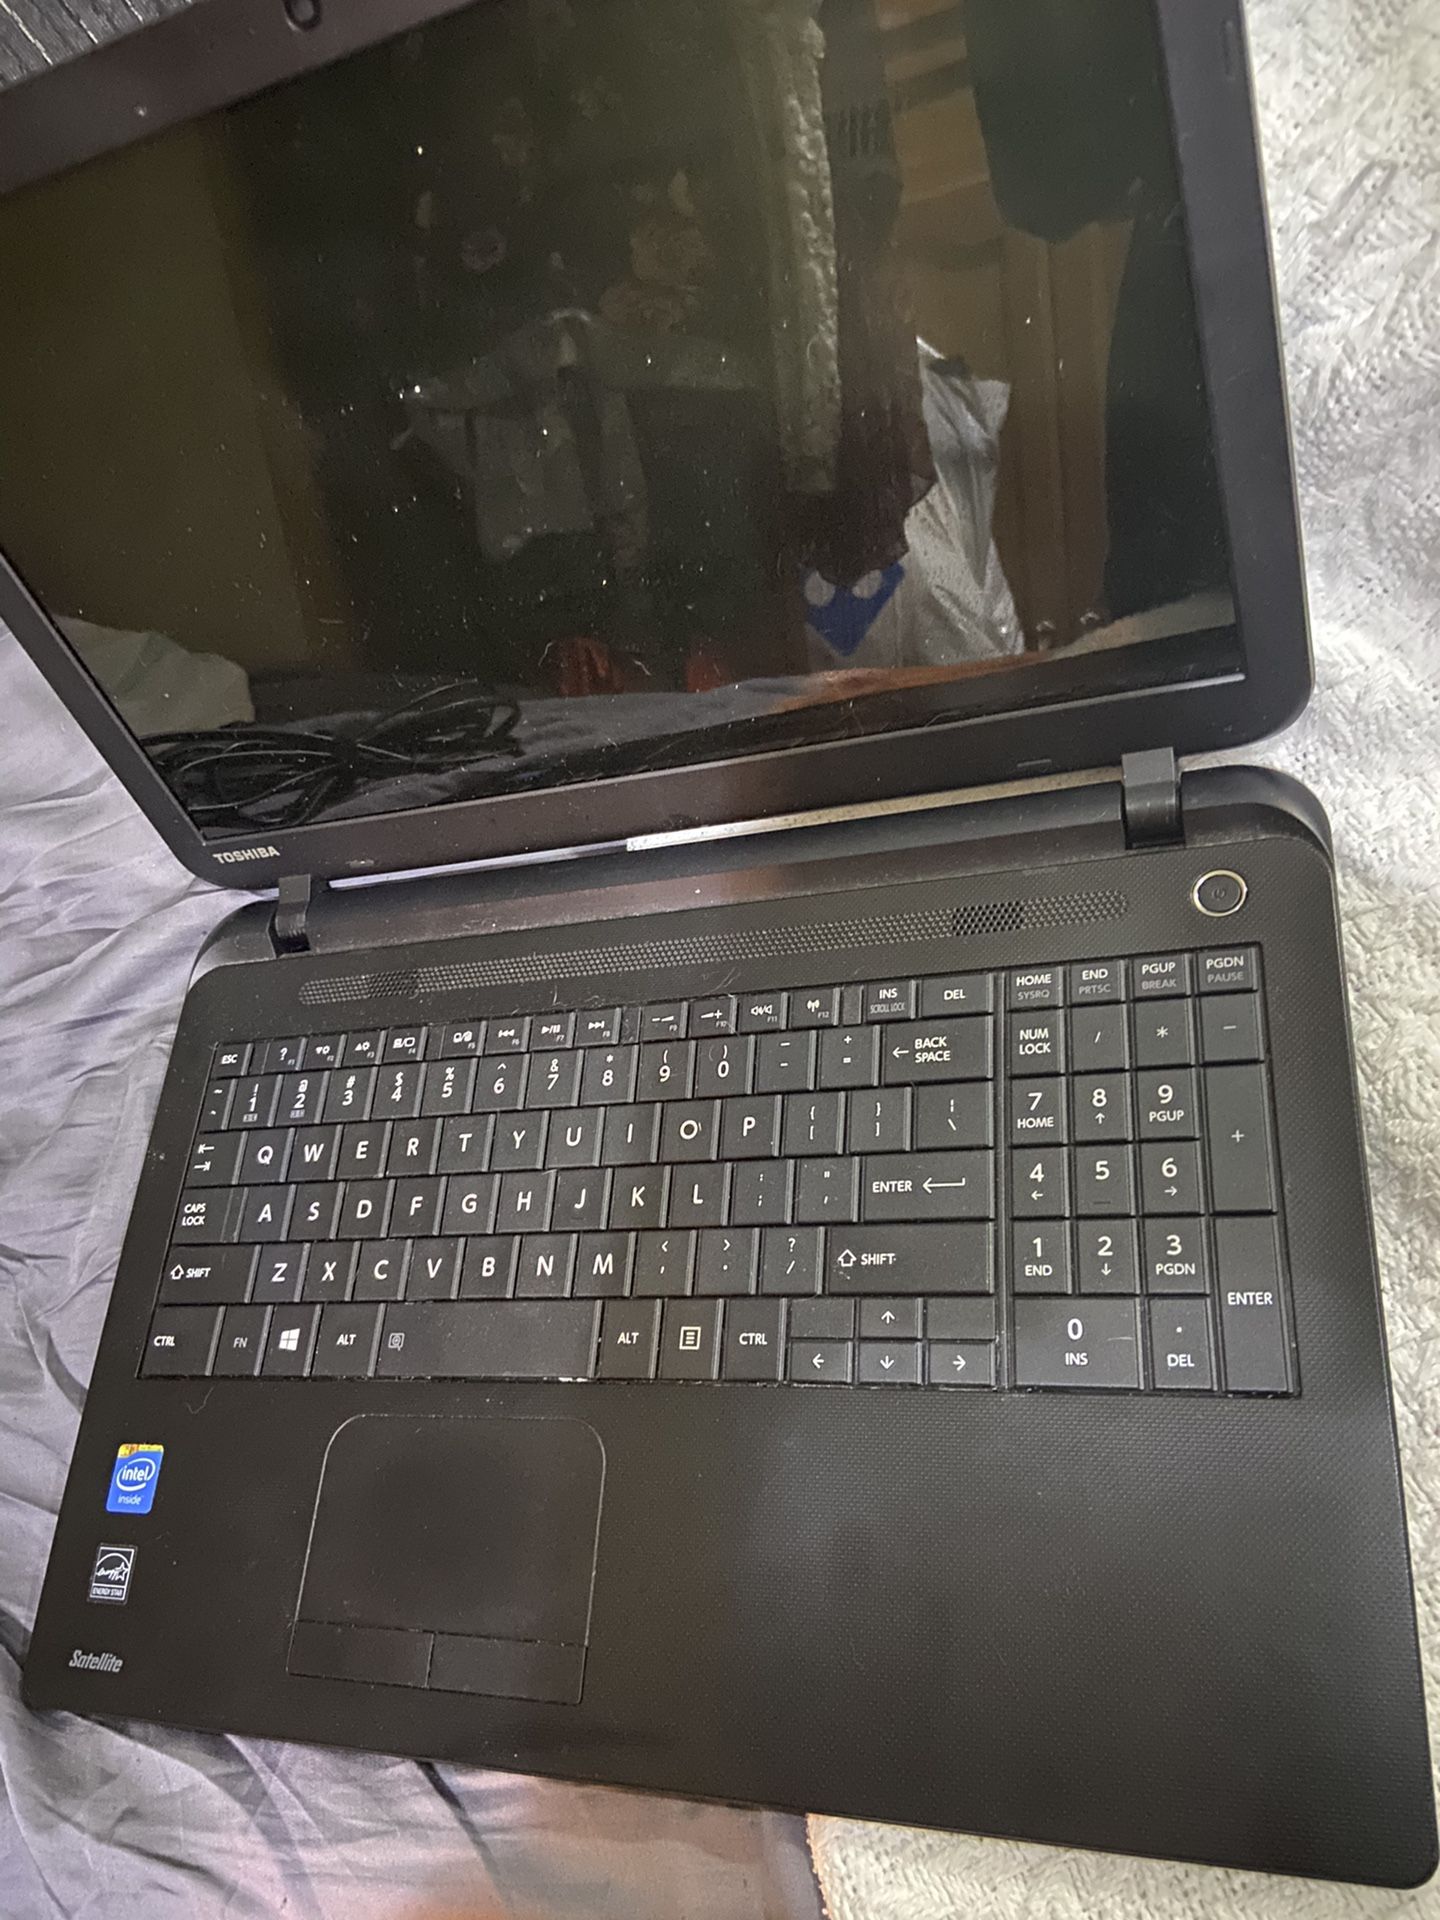 Toshiba laptop w/ webcam and charging cord